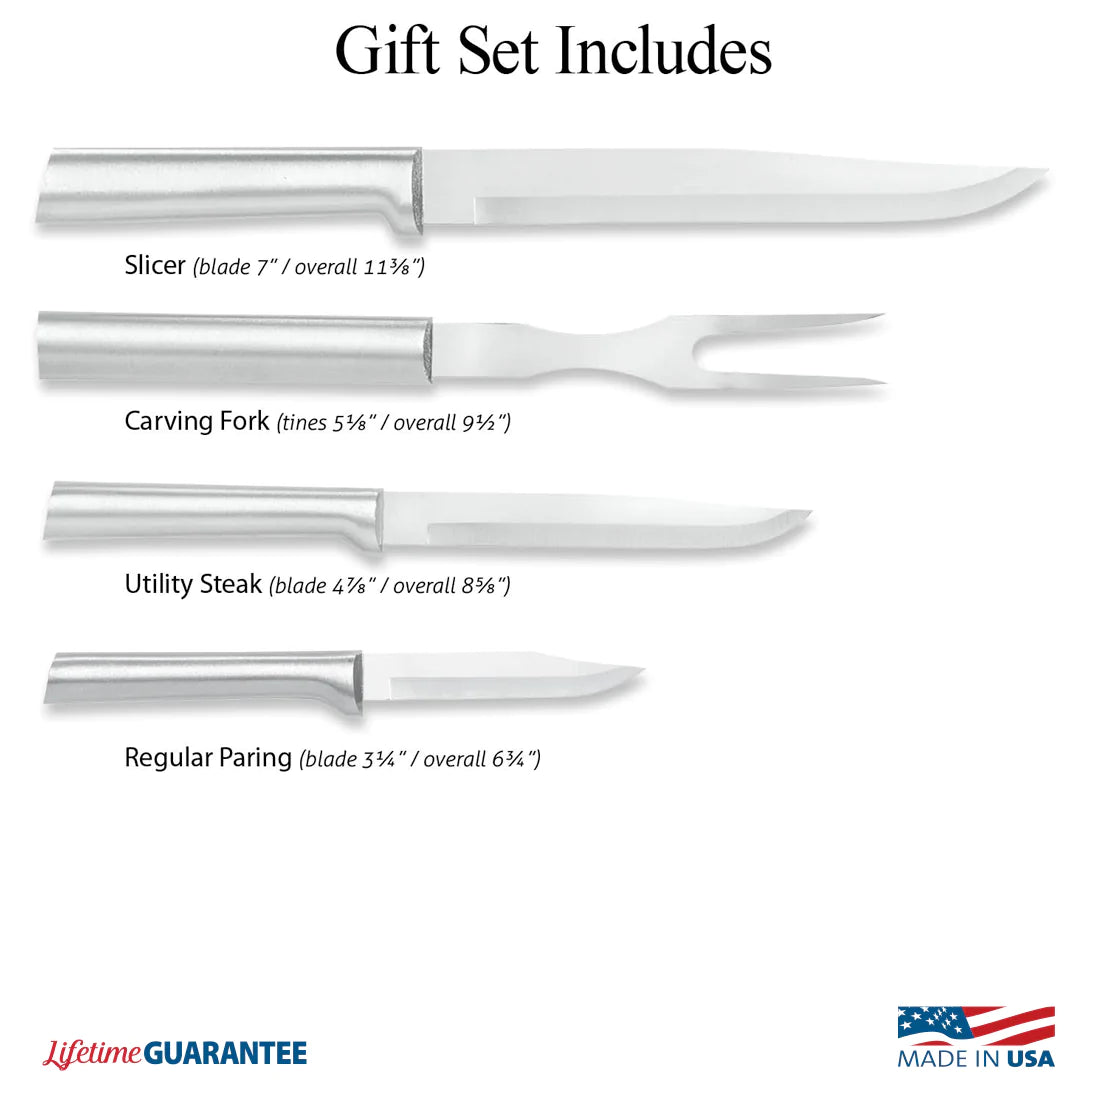 New 6 pc Forever Sharp Surgical Stainless Steel Knife set Carving, filet,  paring